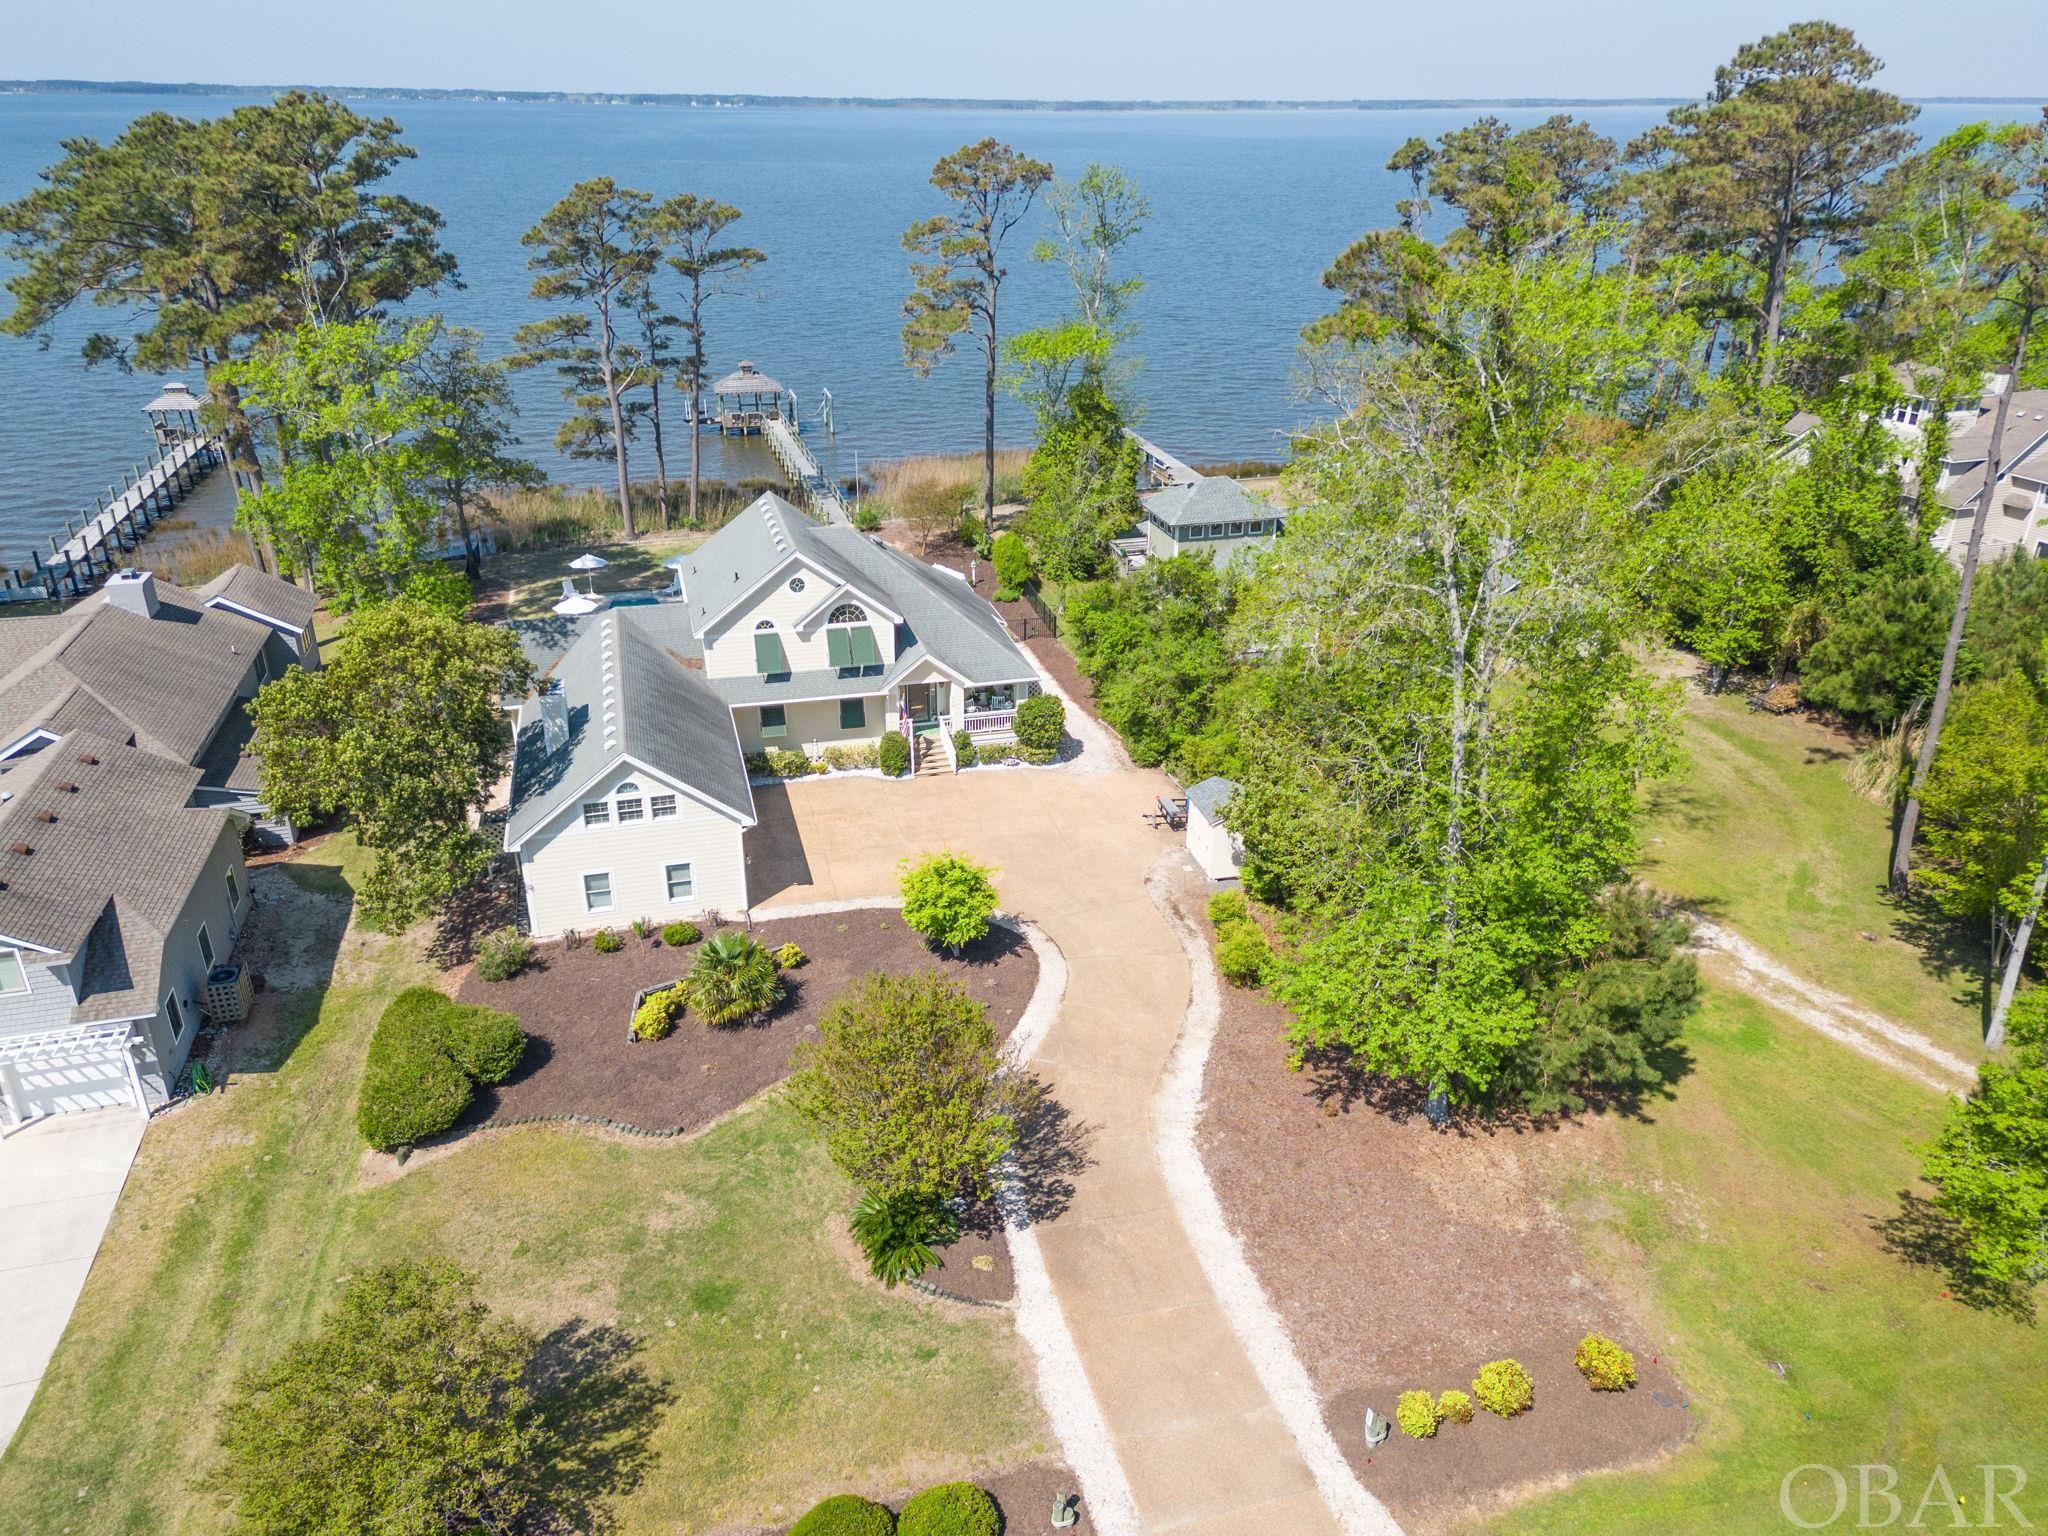 4028 Martins Point Road, Kitty Hawk, NC 27949, 3 Bedrooms Bedrooms, ,3 BathroomsBathrooms,Residential,For sale,Martins Point Road,125395